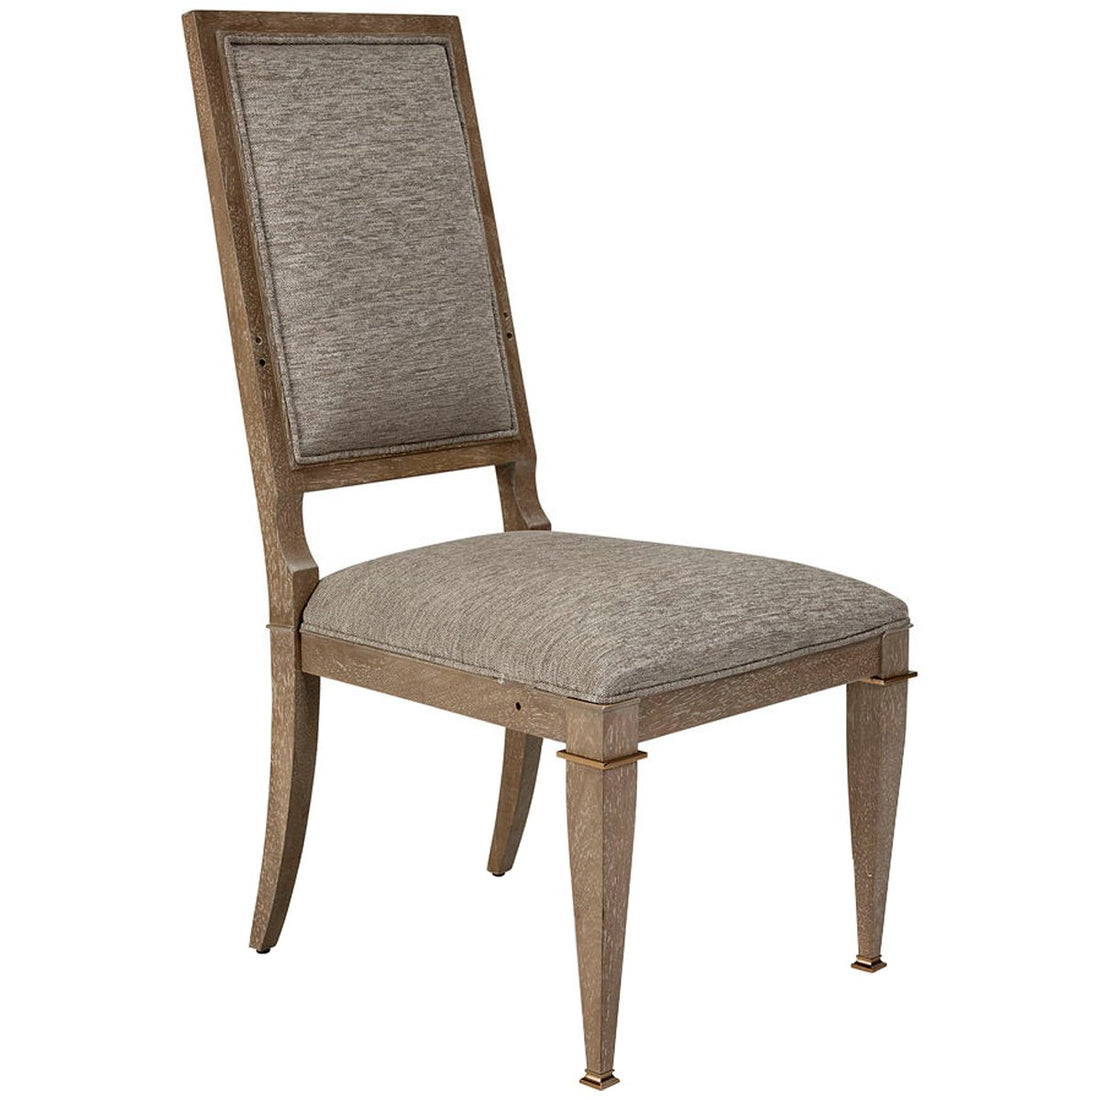 A.R.T. Furniture Cityscapes Bleecker Upholstered Side Chair, Set of 2